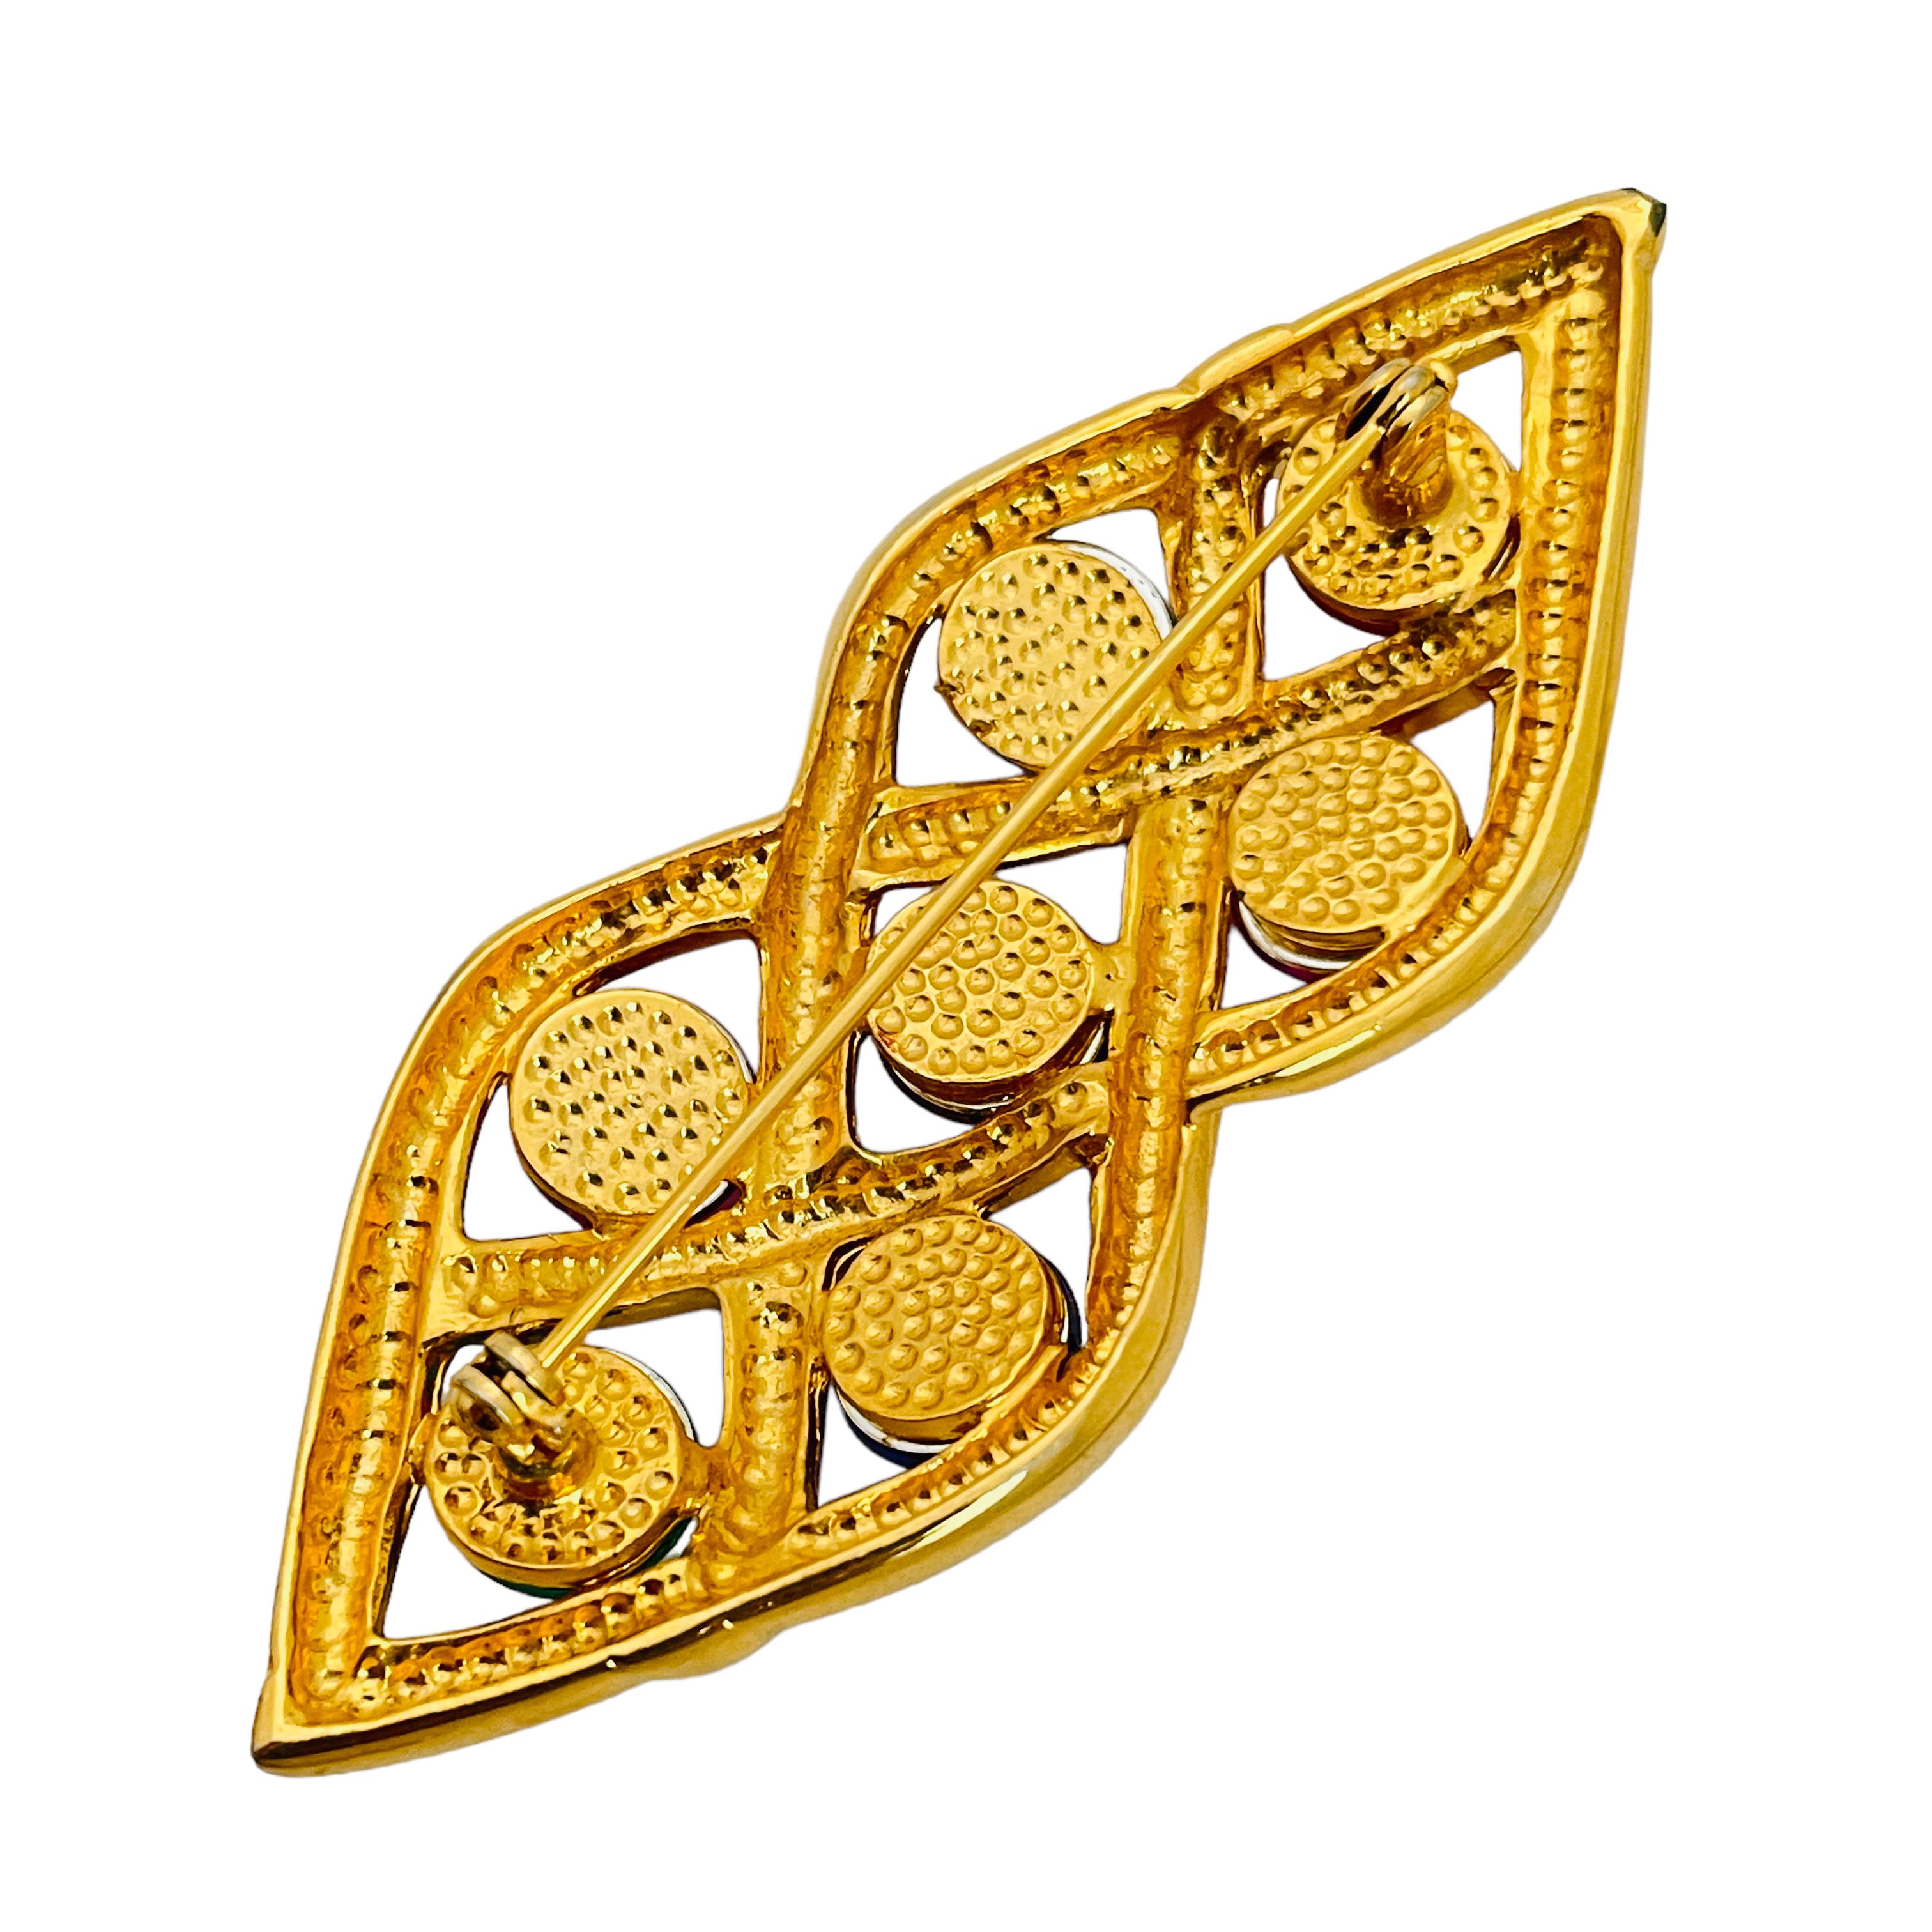 Vintage gold jewel colorful designer runway brooch In Excellent Condition For Sale In Palos Hills, IL